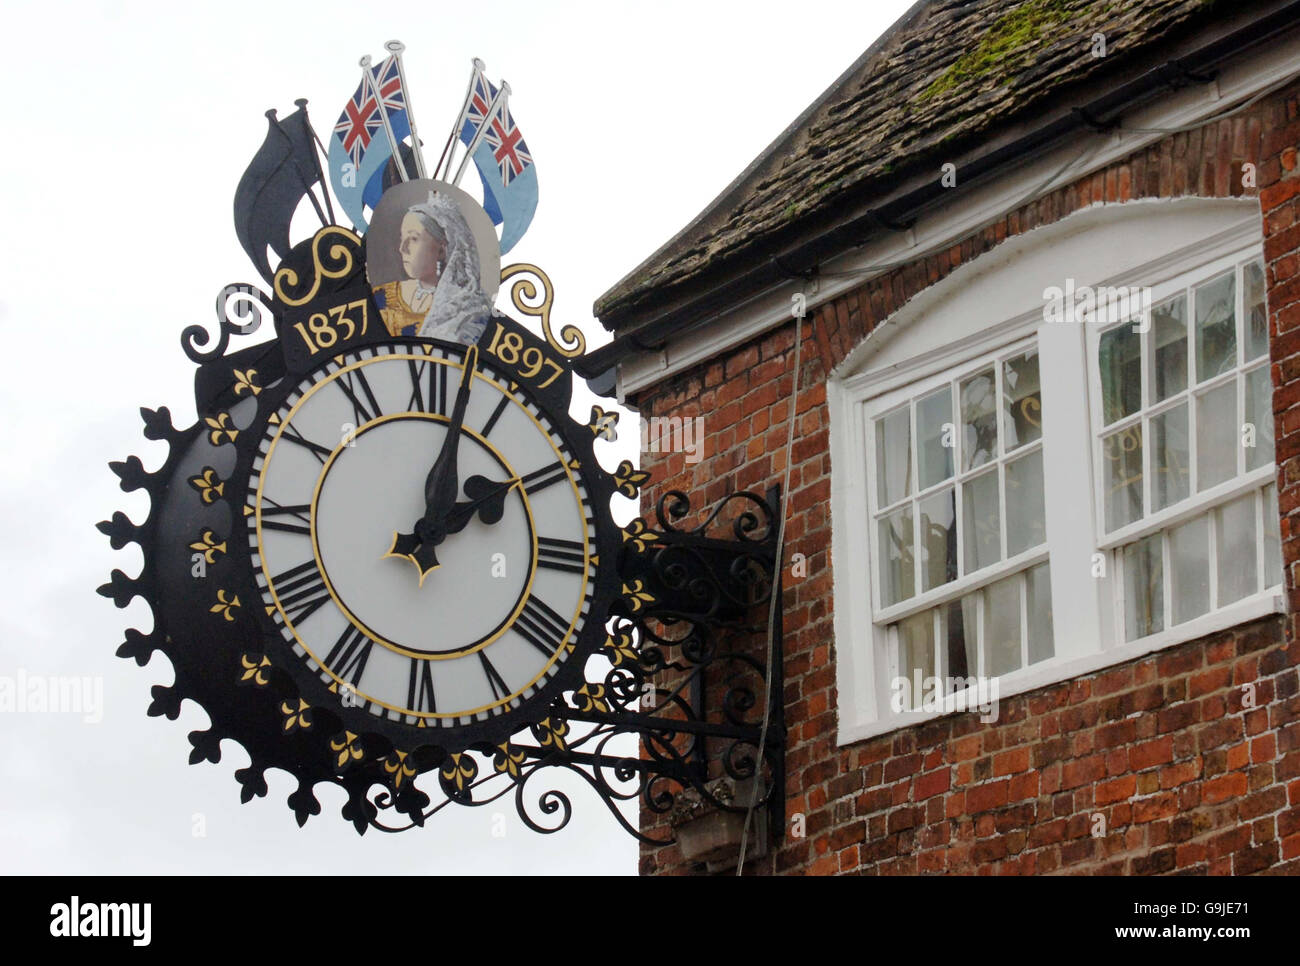 The Tolsey Clock in Wotton-under-Edge, Gloucestershire as clocks go back one hour at 2am on Sunday. PRESS ASOCIATION Photo. Picture date: Friday October 27, 2006. Photo credit should read: Barry Batchelor/PA Stock Photo